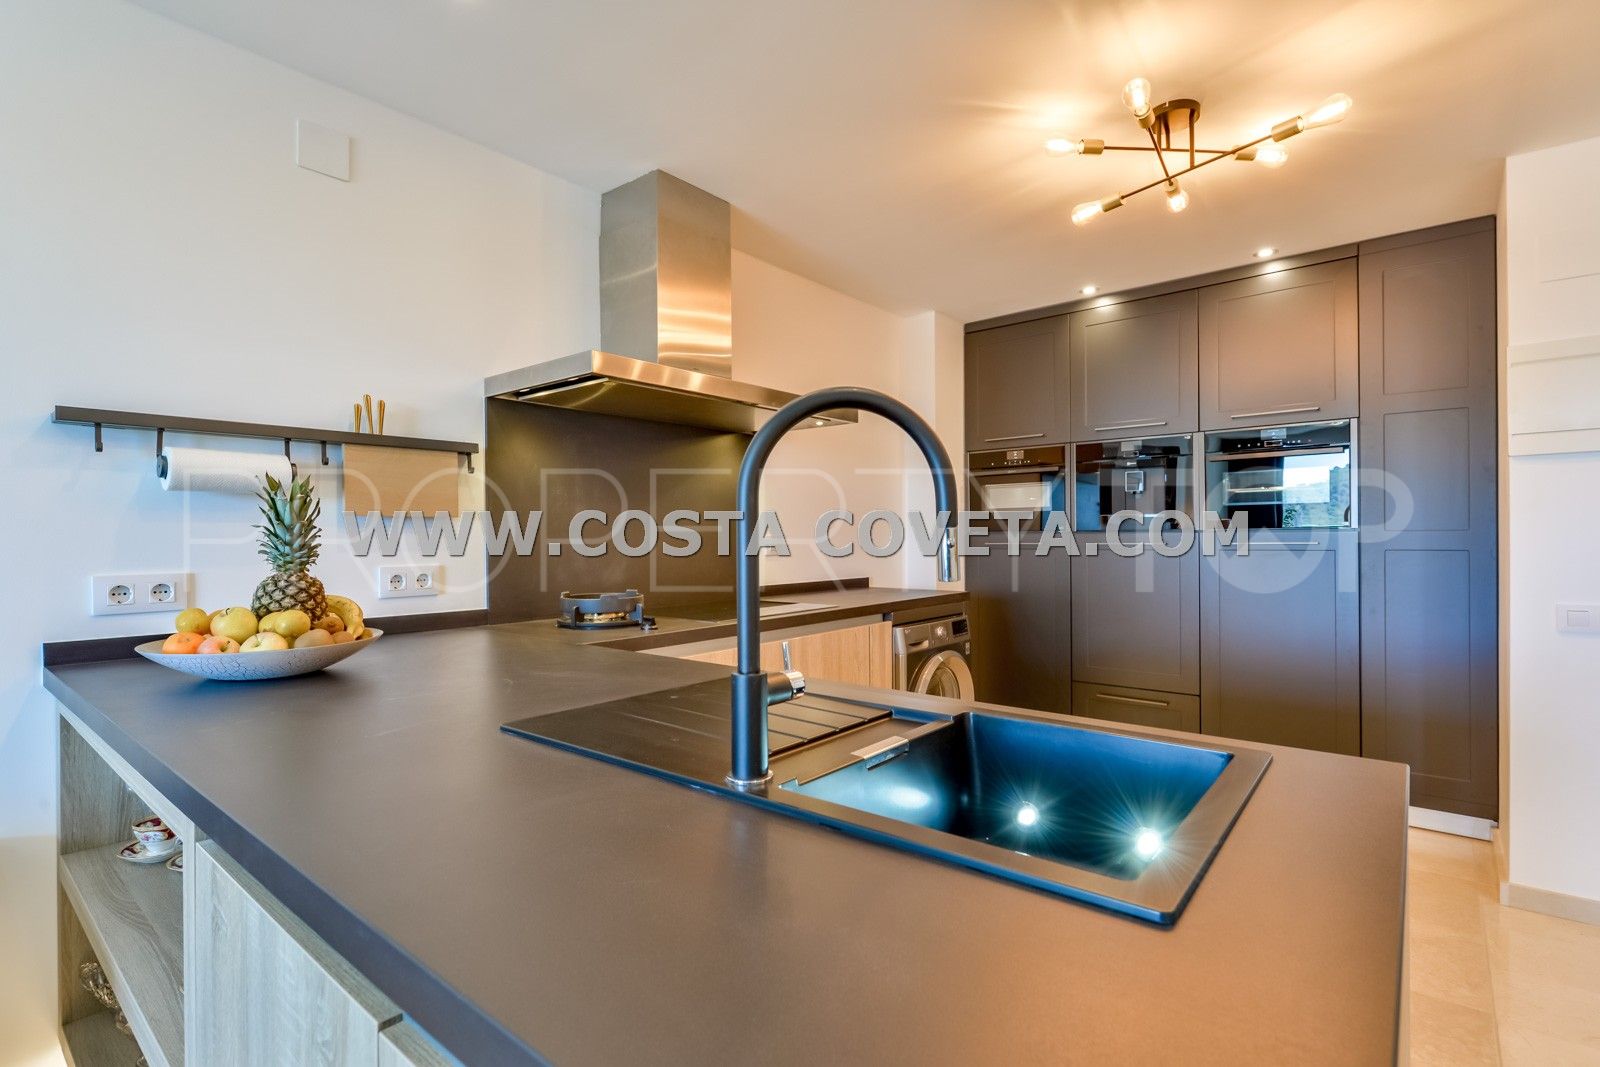 For sale apartment with 1 bedroom in Cala de Finestrat